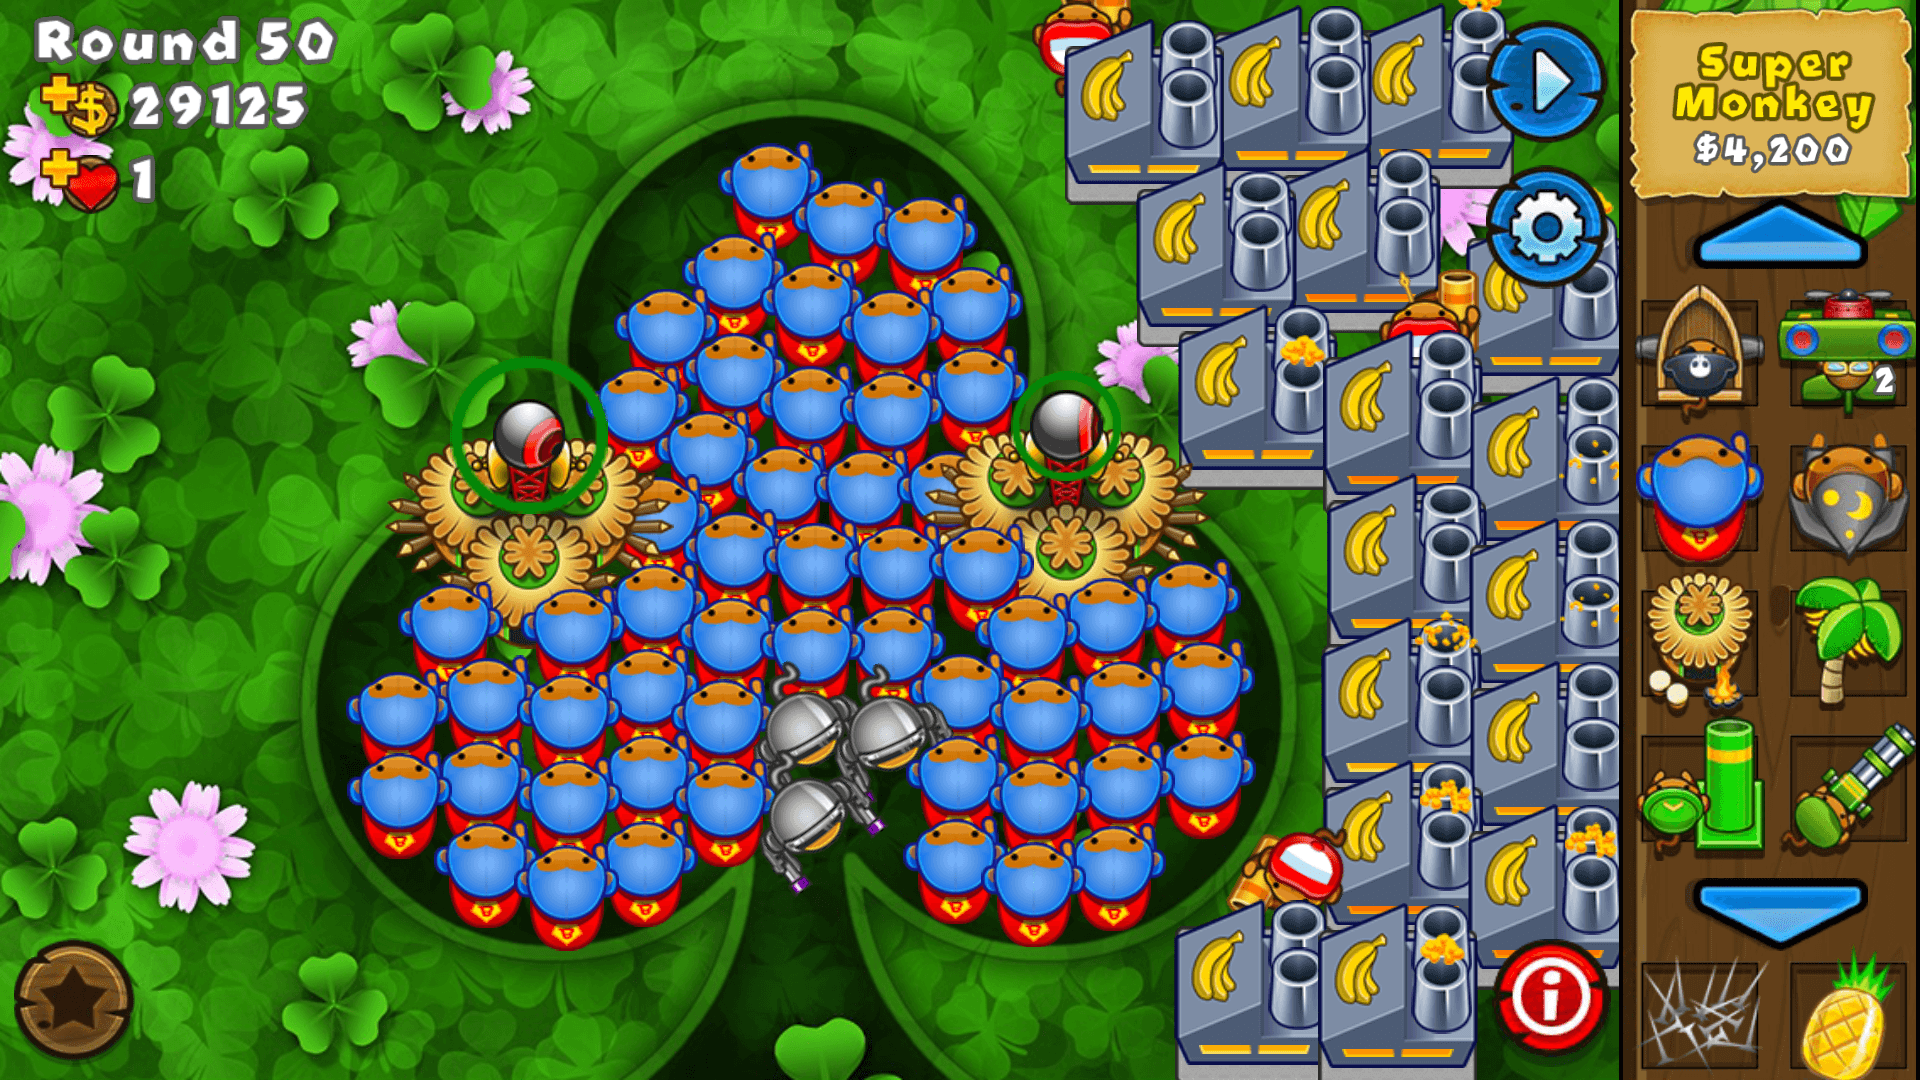 So I play a lot of Bloons Tower Defense